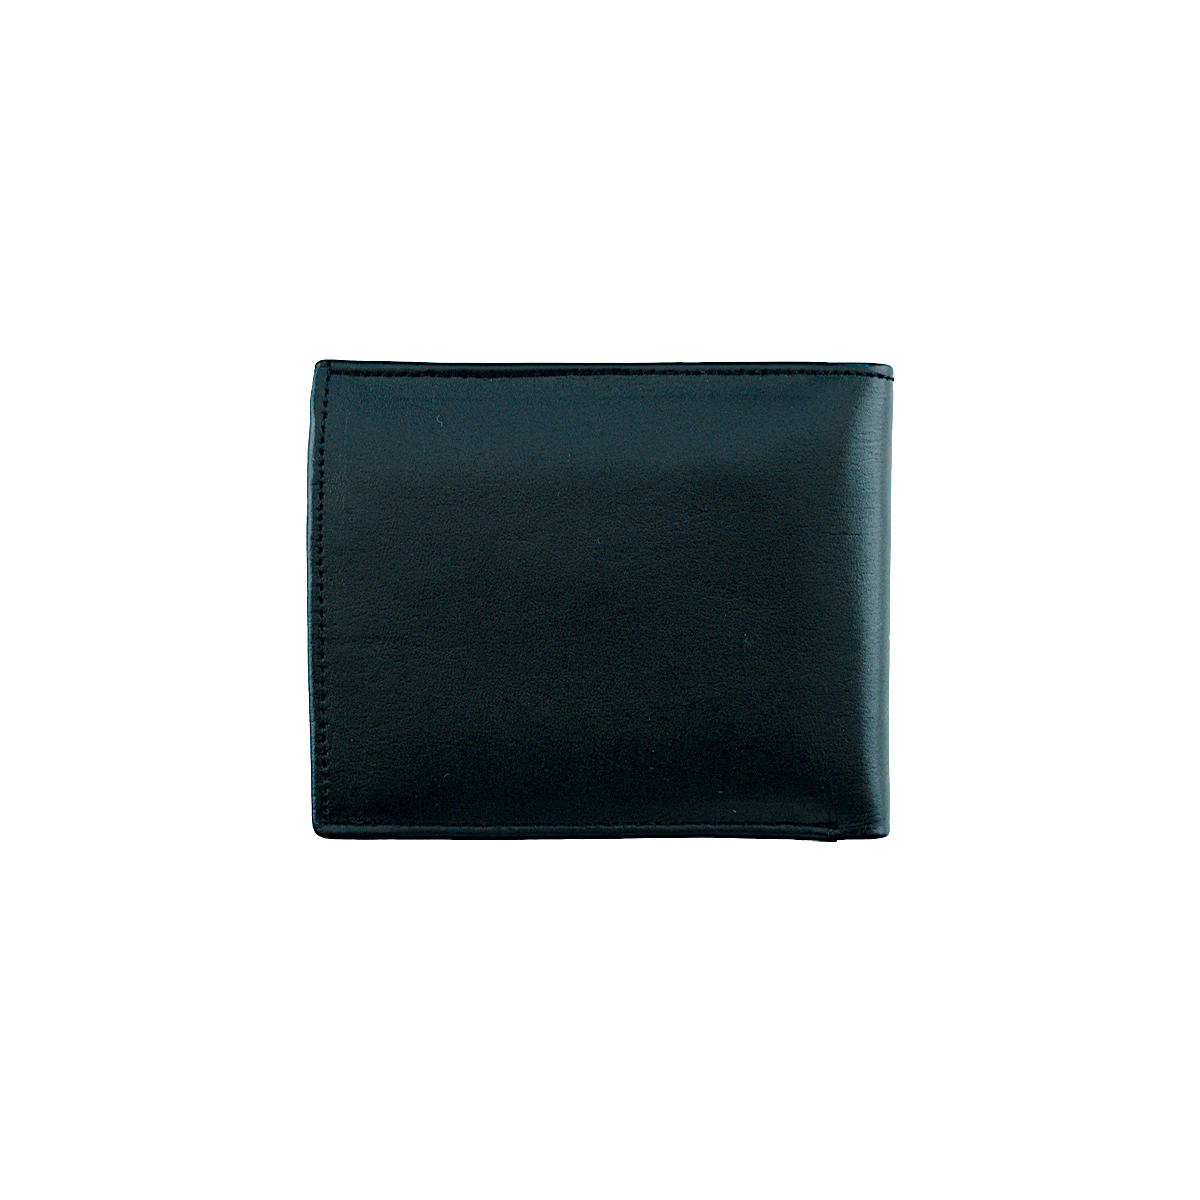 Leather Wallet - Black is-hover